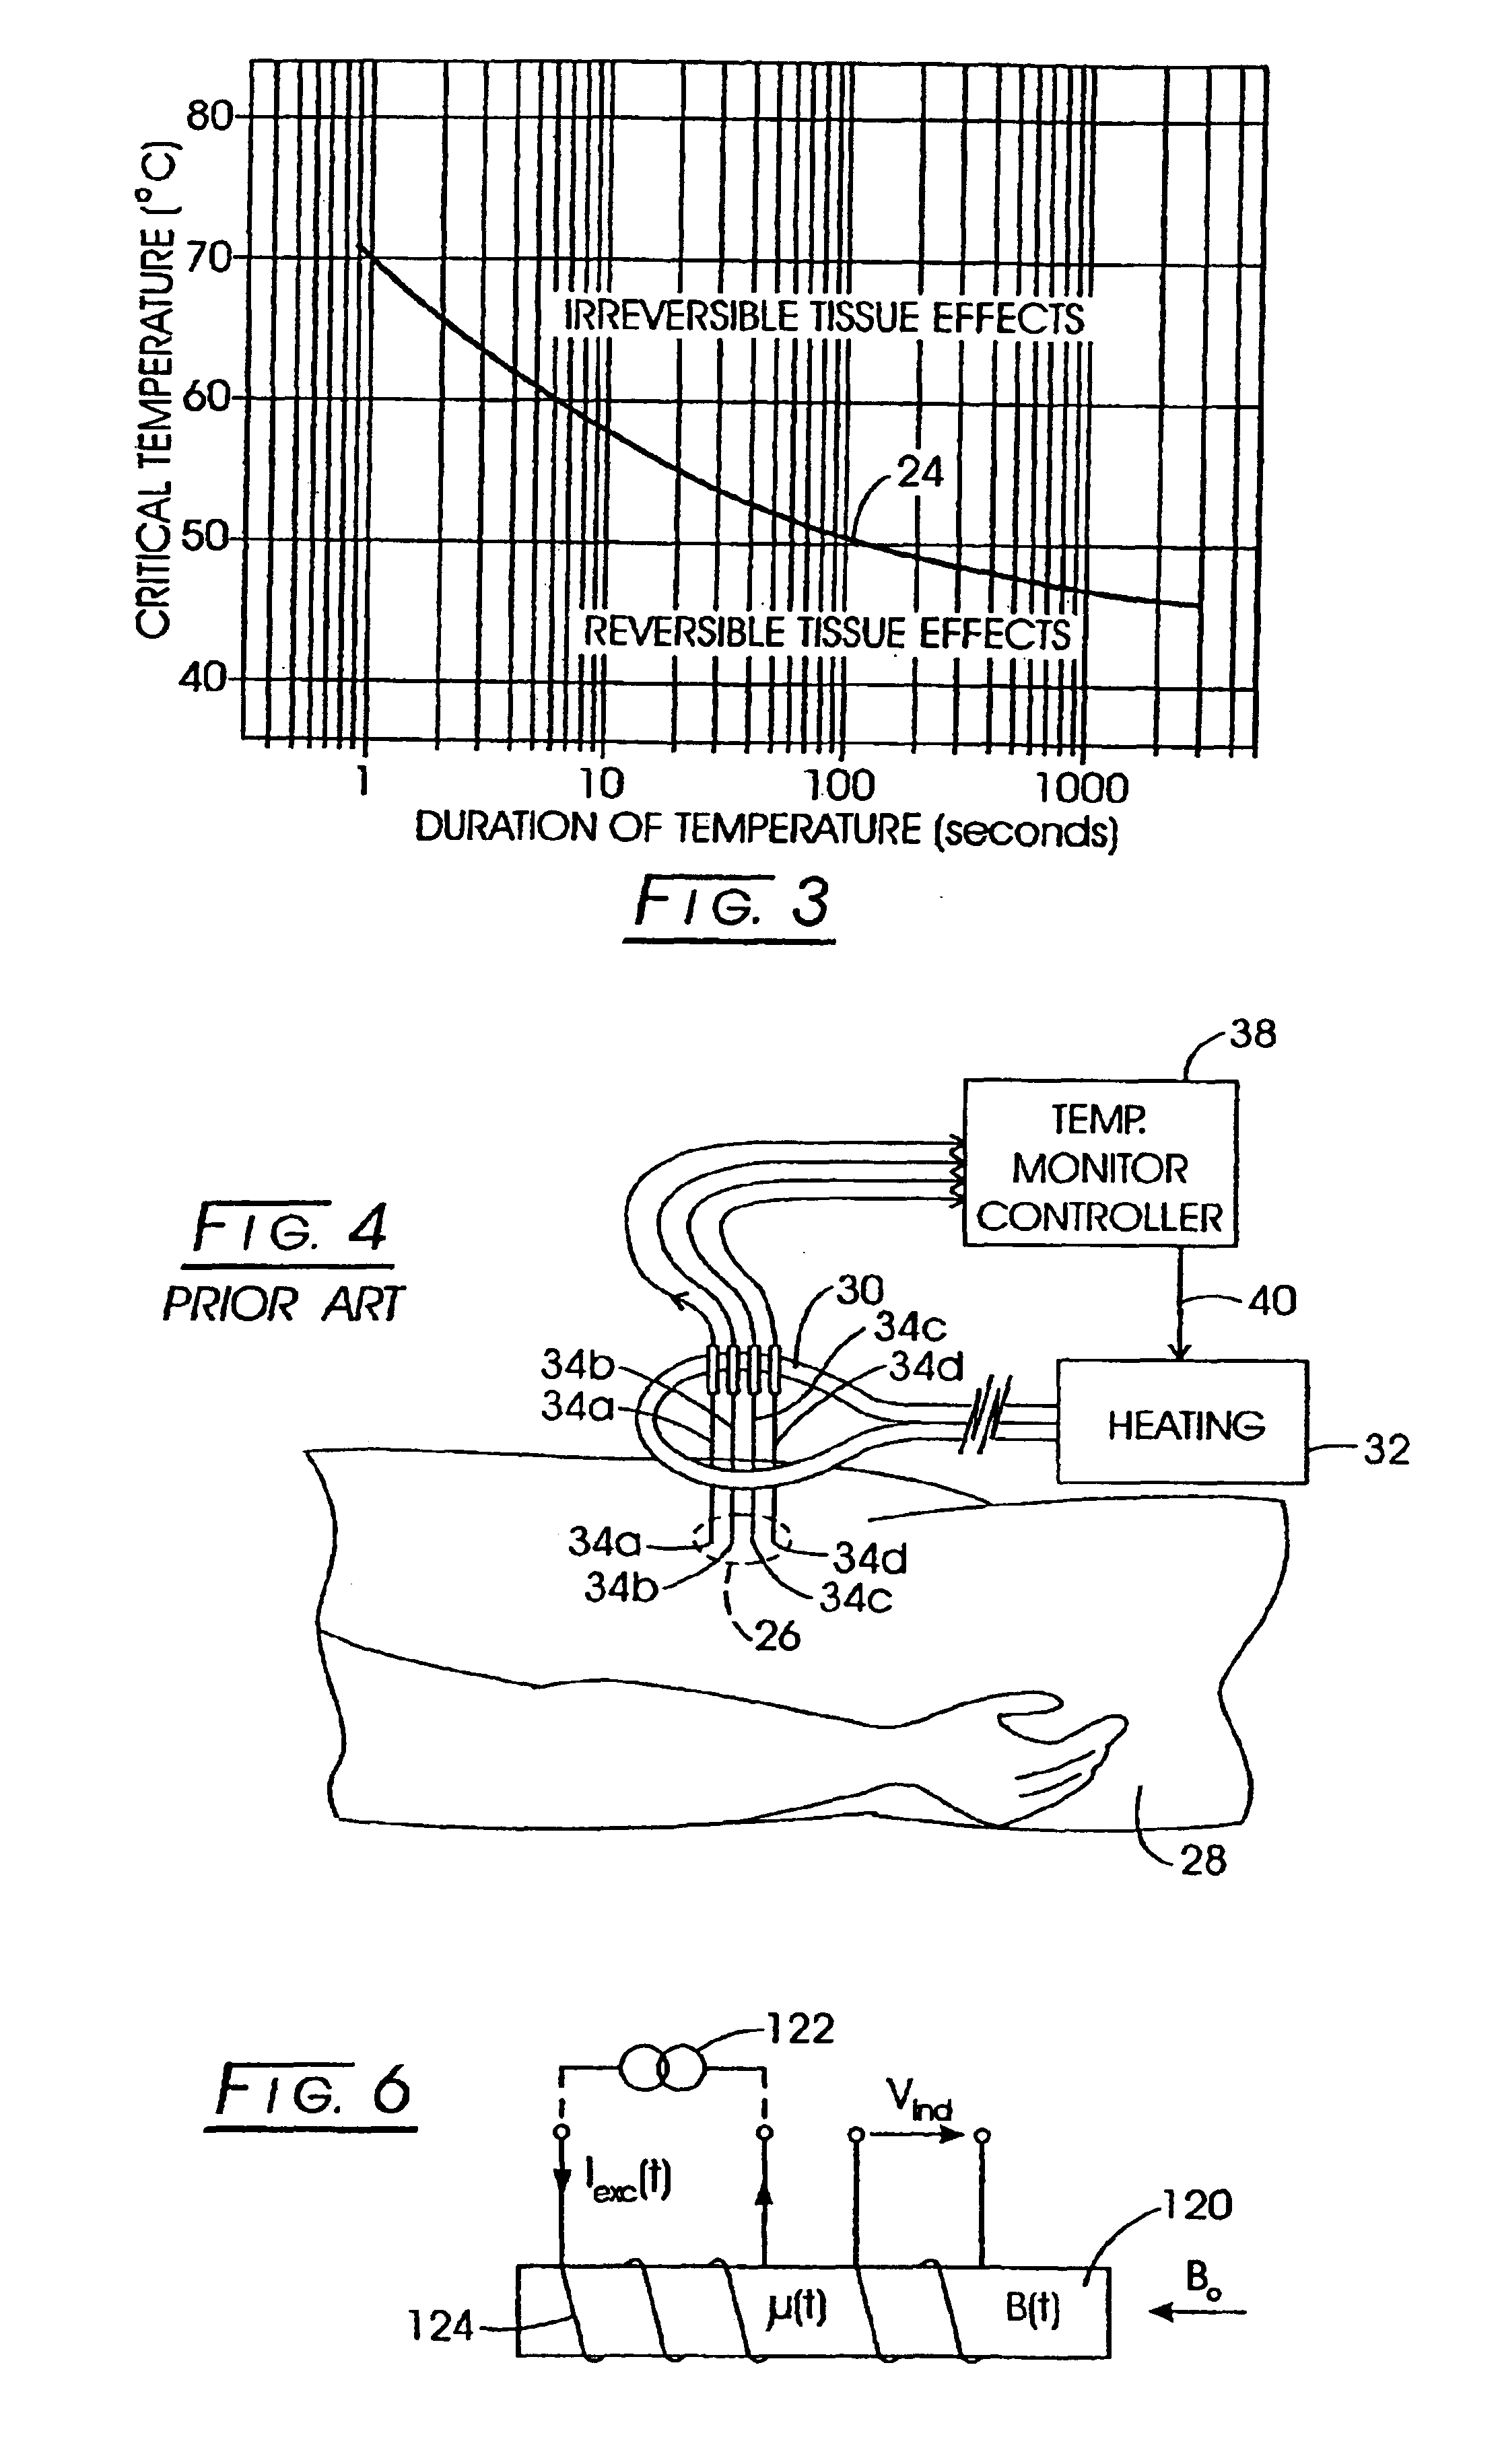 System method and apparatus for localized heating of tissue